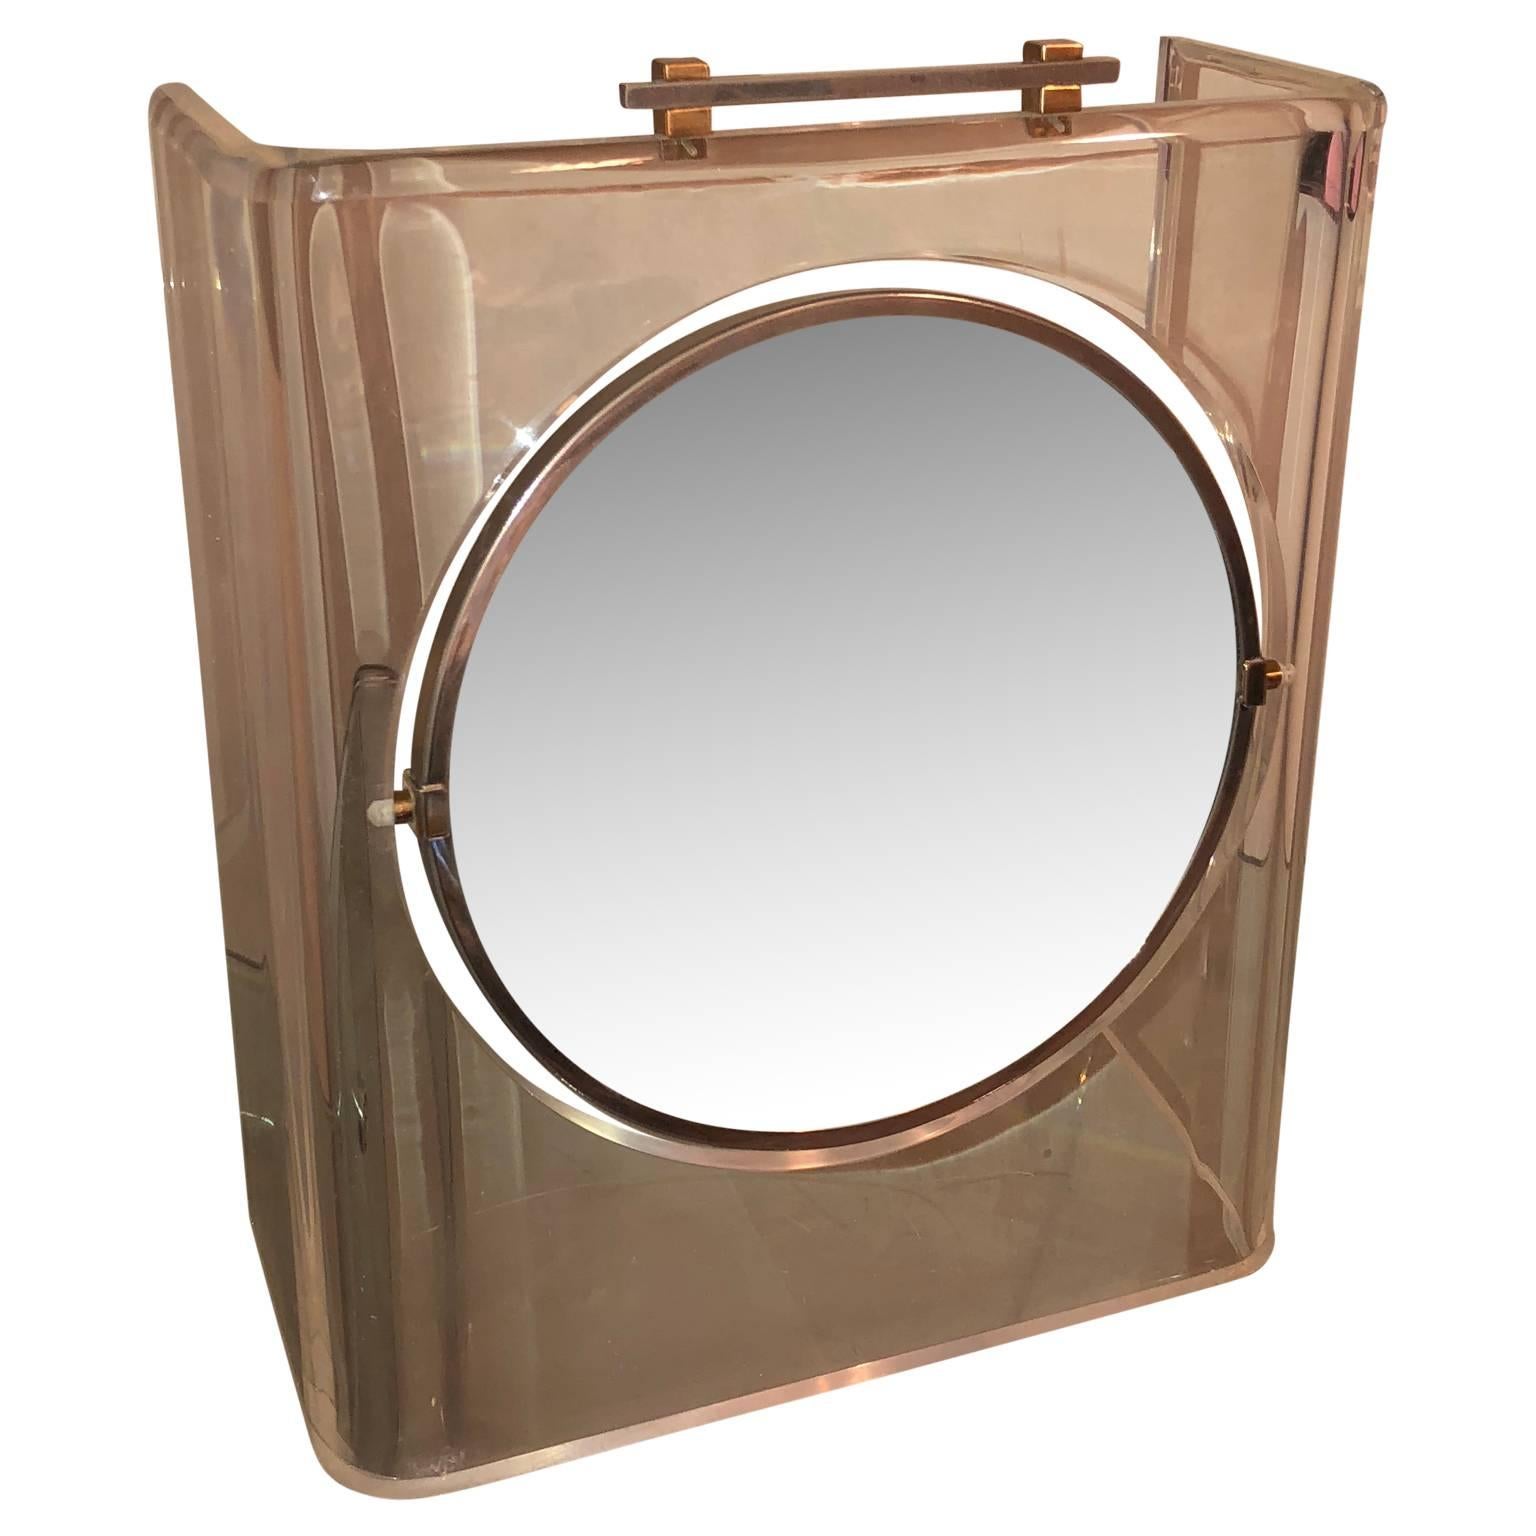 Hand-Crafted Italian Mid-Century Modern Lucite Chrome and Brass Vanity Table Mirror For Sale